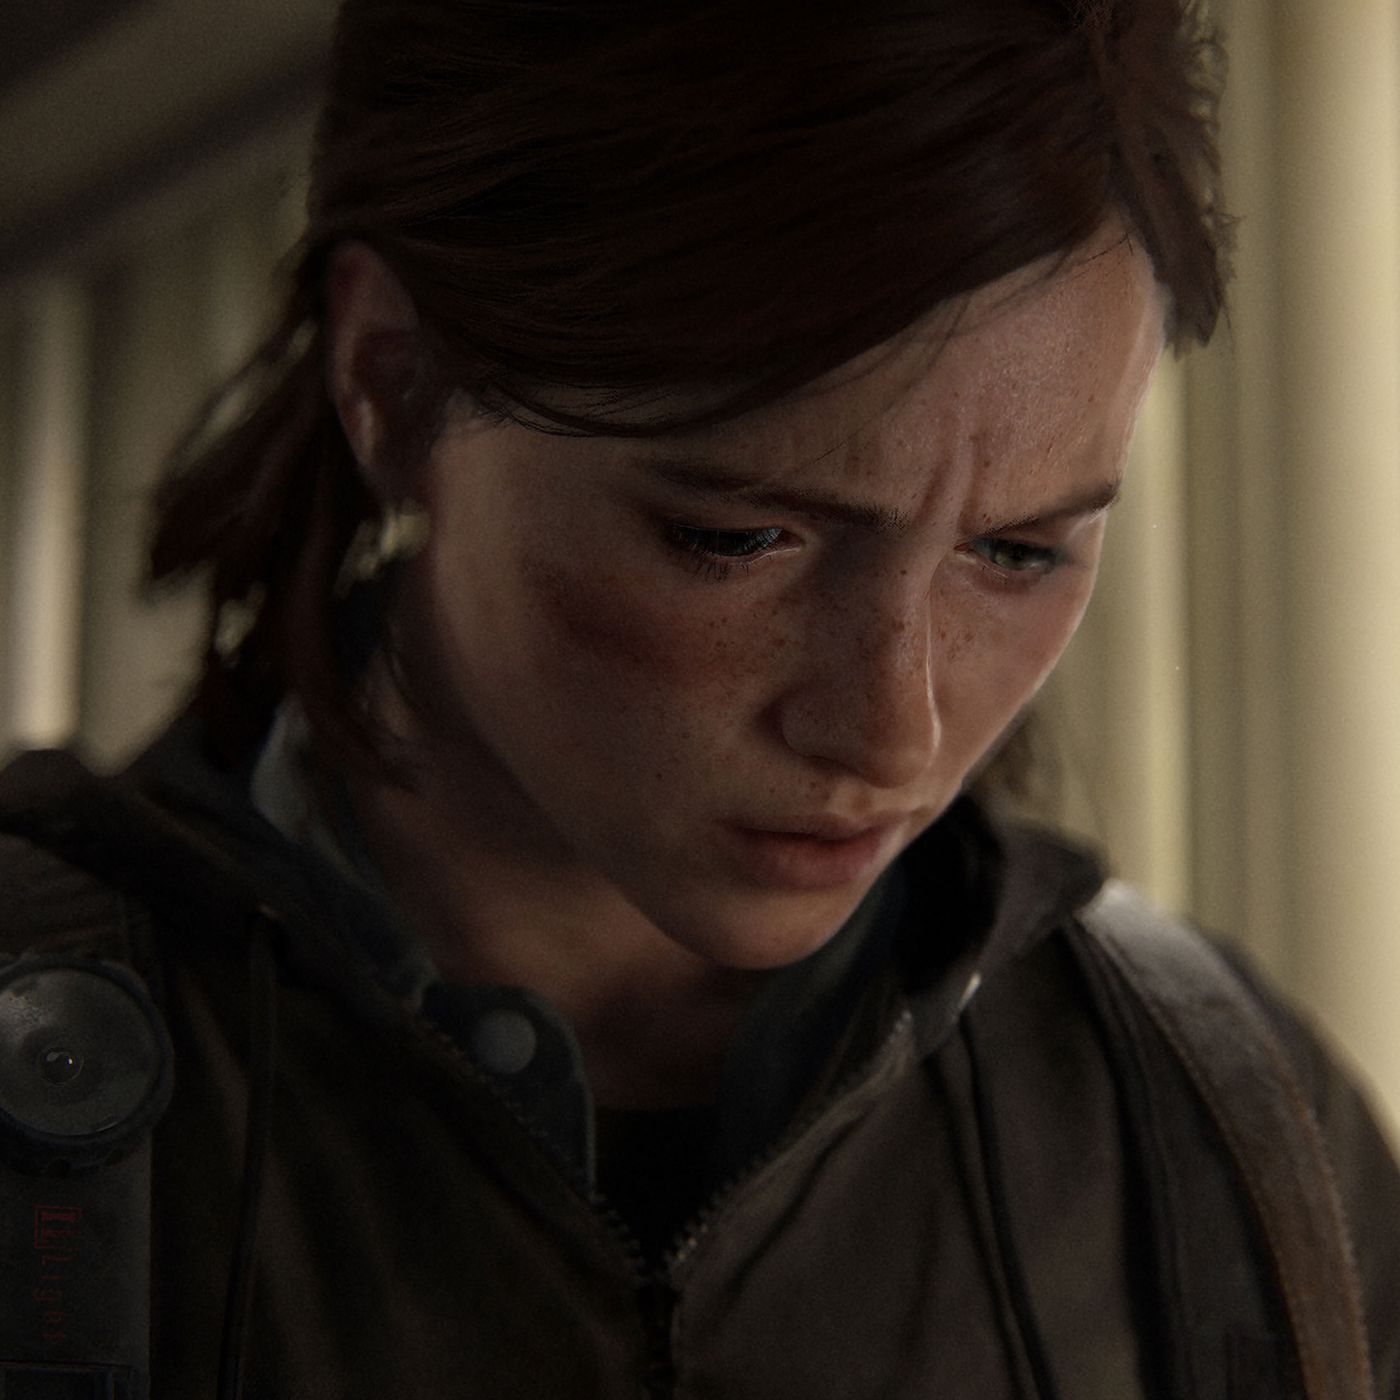 The Last of Us: Ellie's Backstory - The Game of Nerds